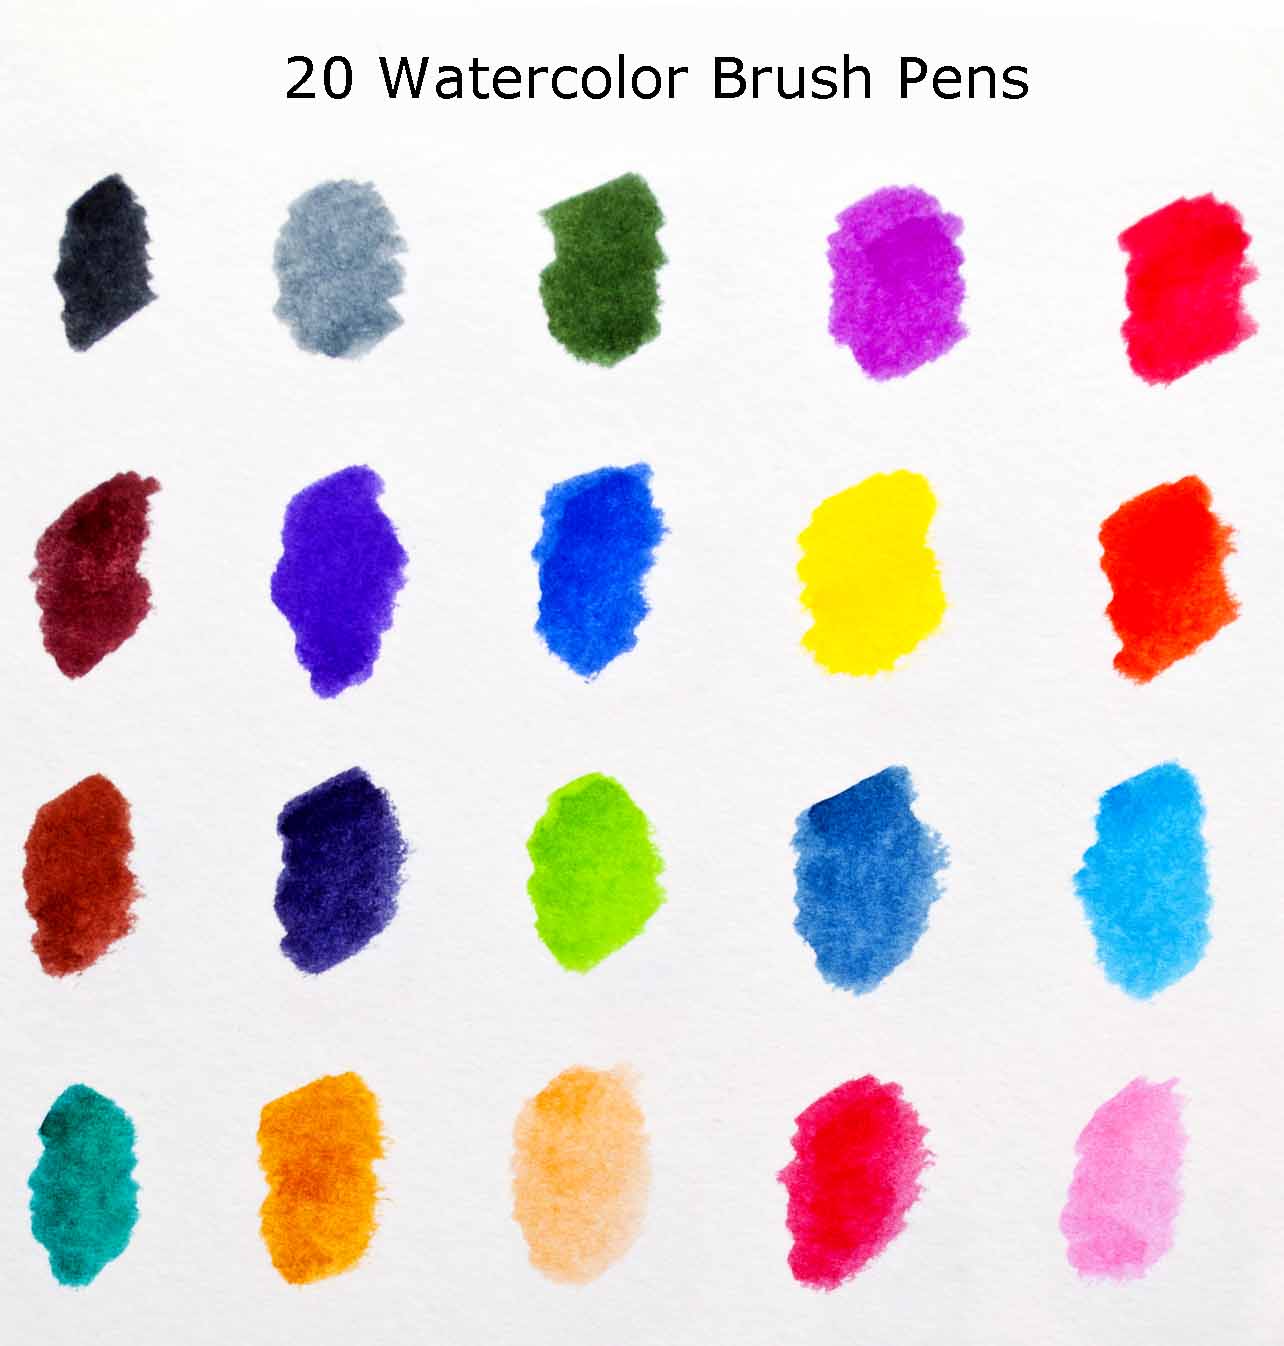 Watercolor Brush Pens Set - Super Easy to Use and Fill, Watercolor Pens  Brush Set of 9 Piece for Water Soluble Colored Pencil, Aqua Brush Pen for